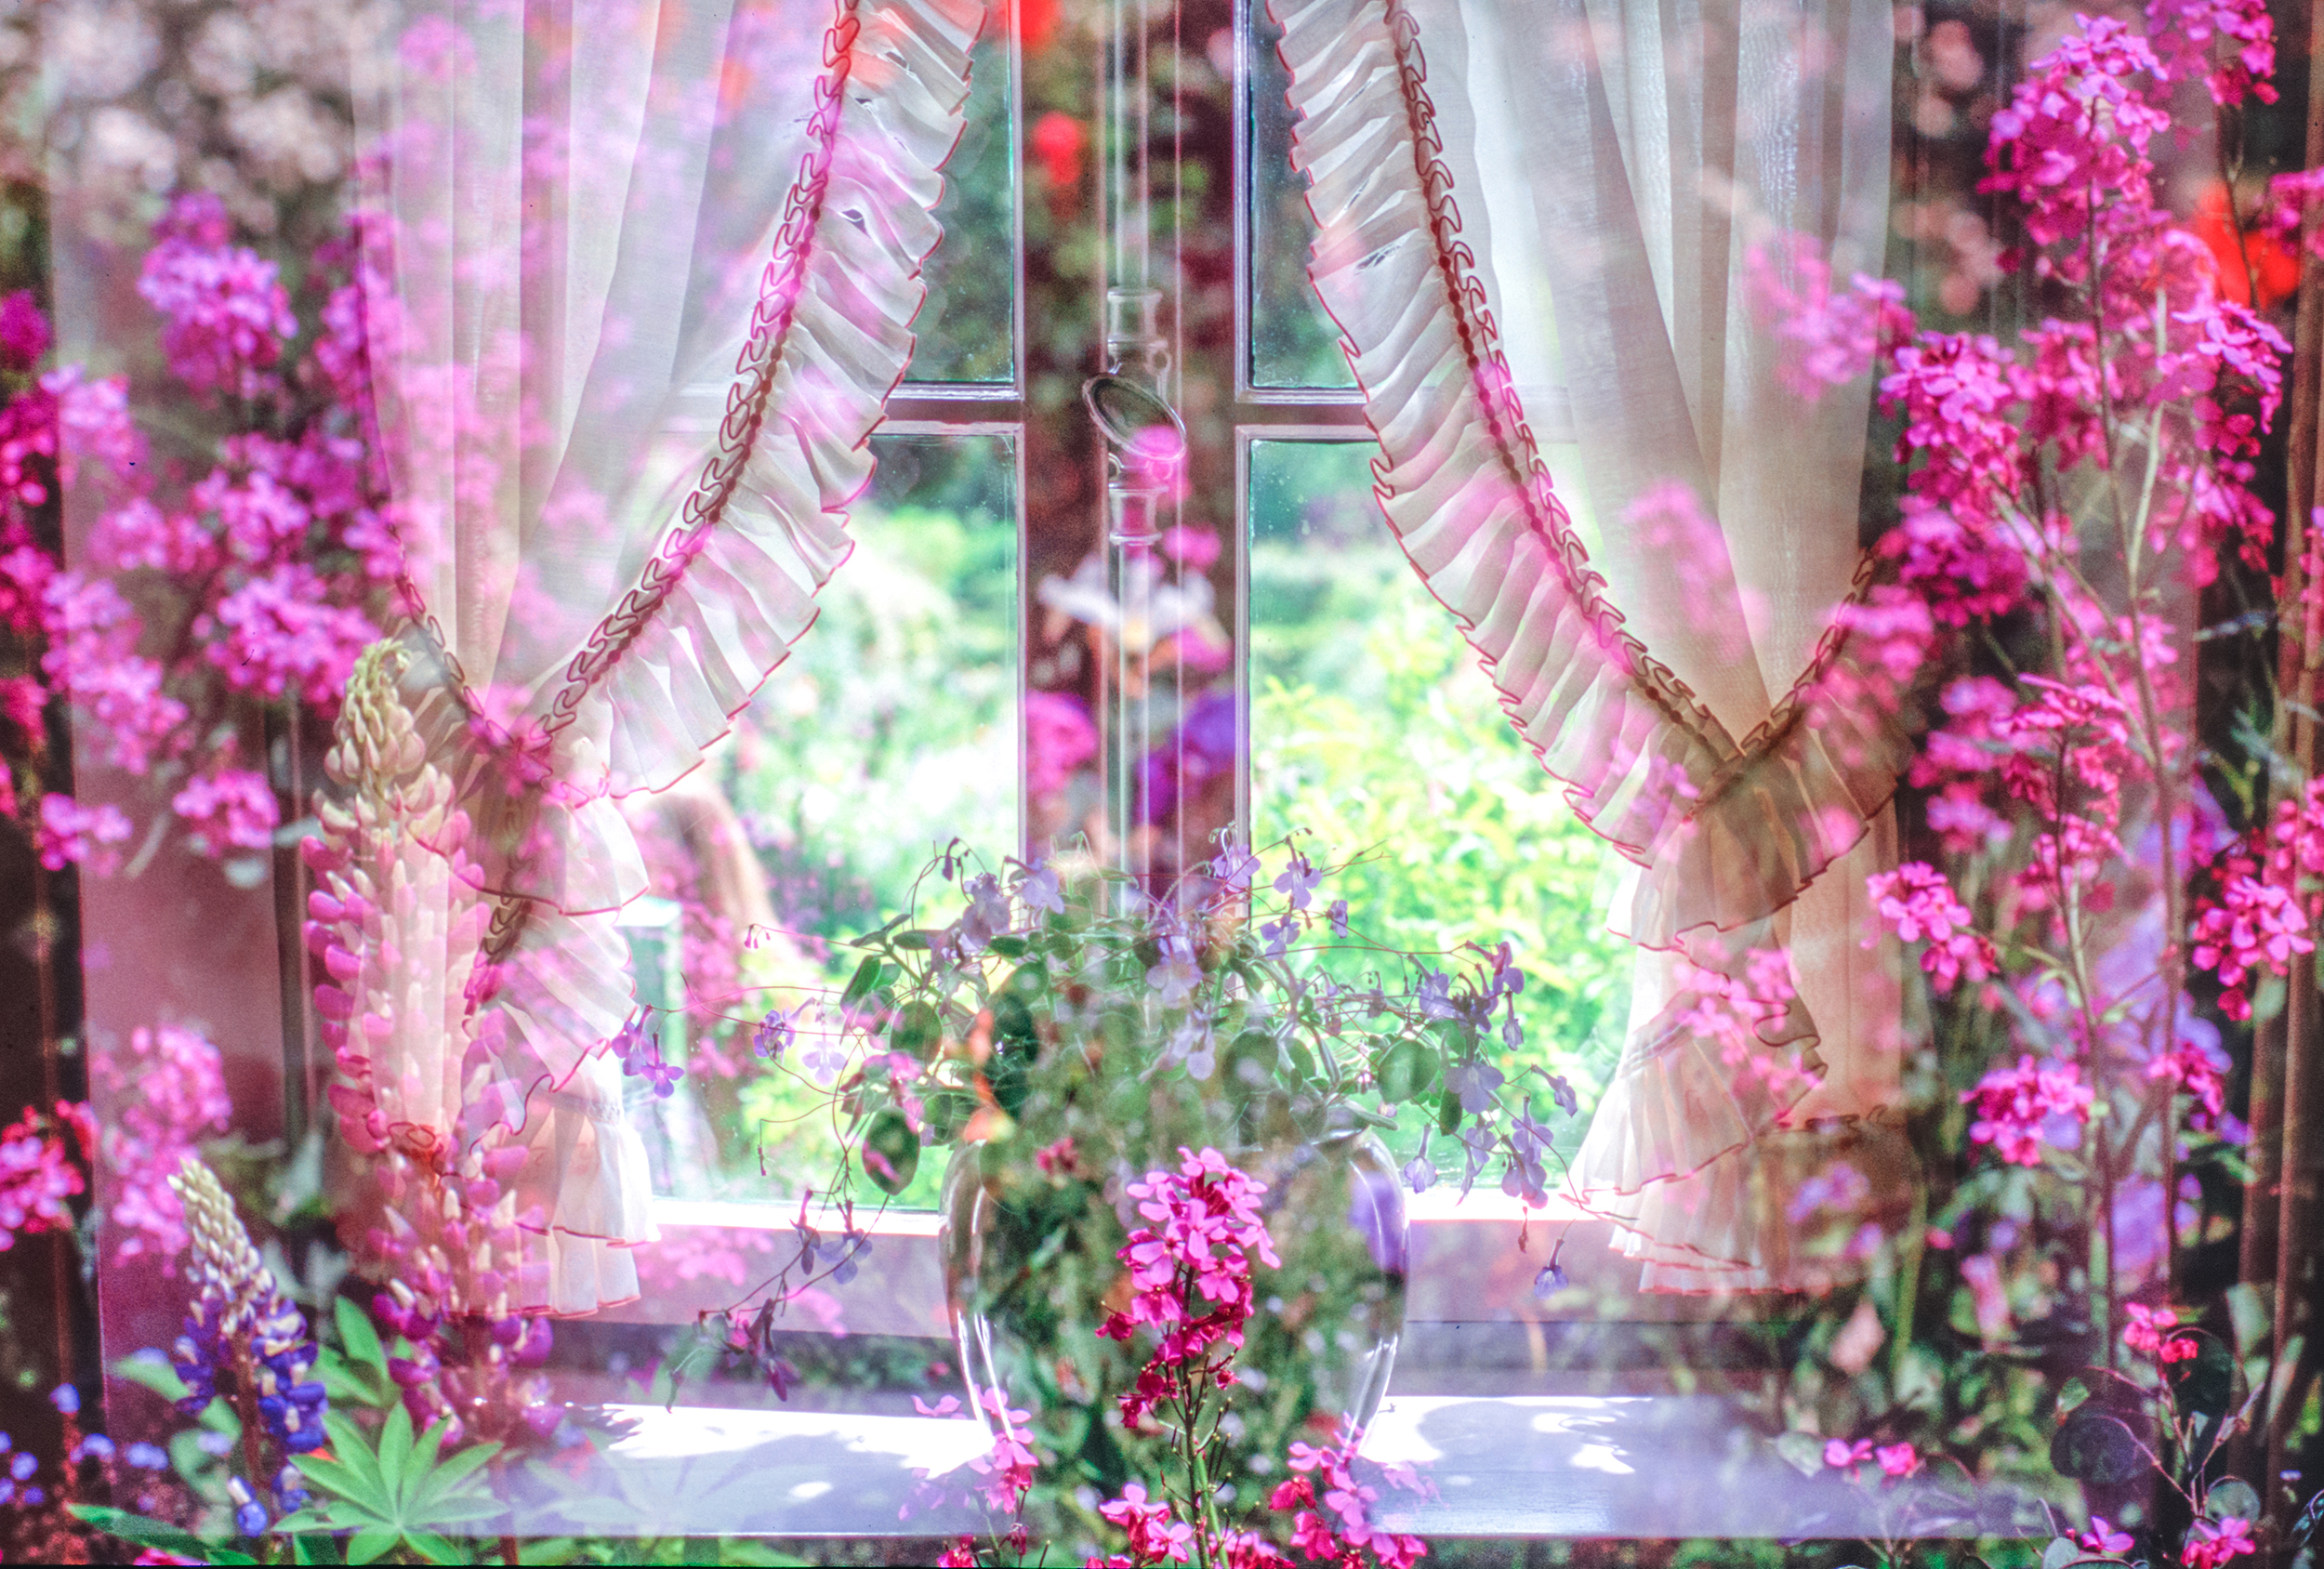  An Ode to Monet - his house in Giverny double exposed with is garden 